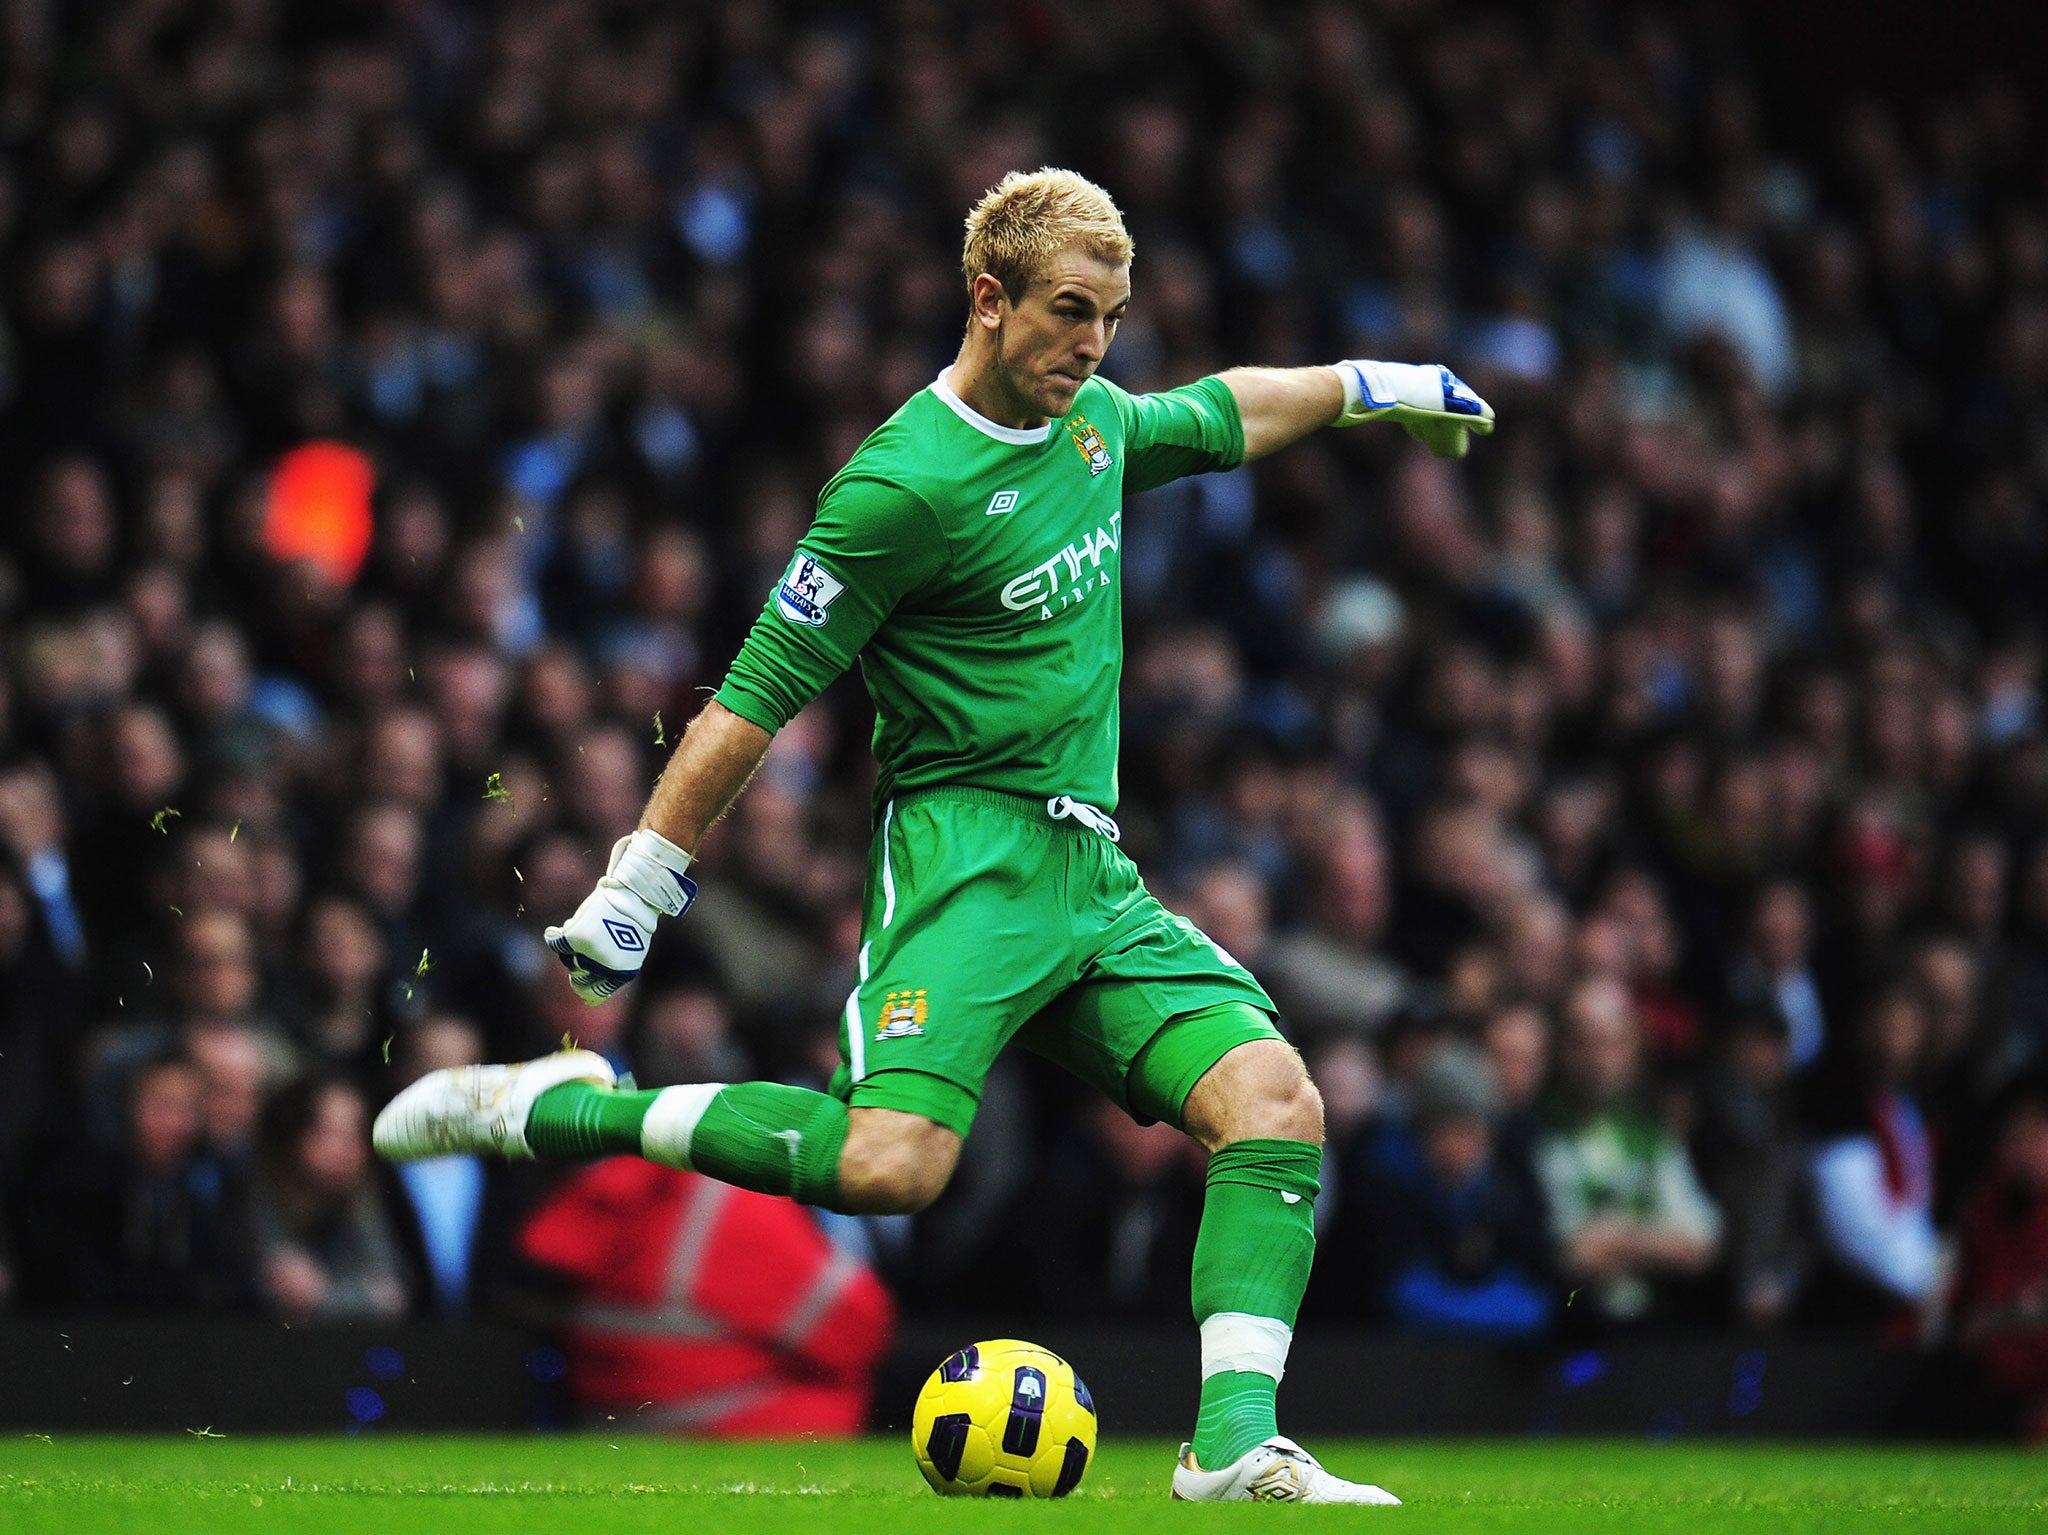 A young Joe Hart back in 2010